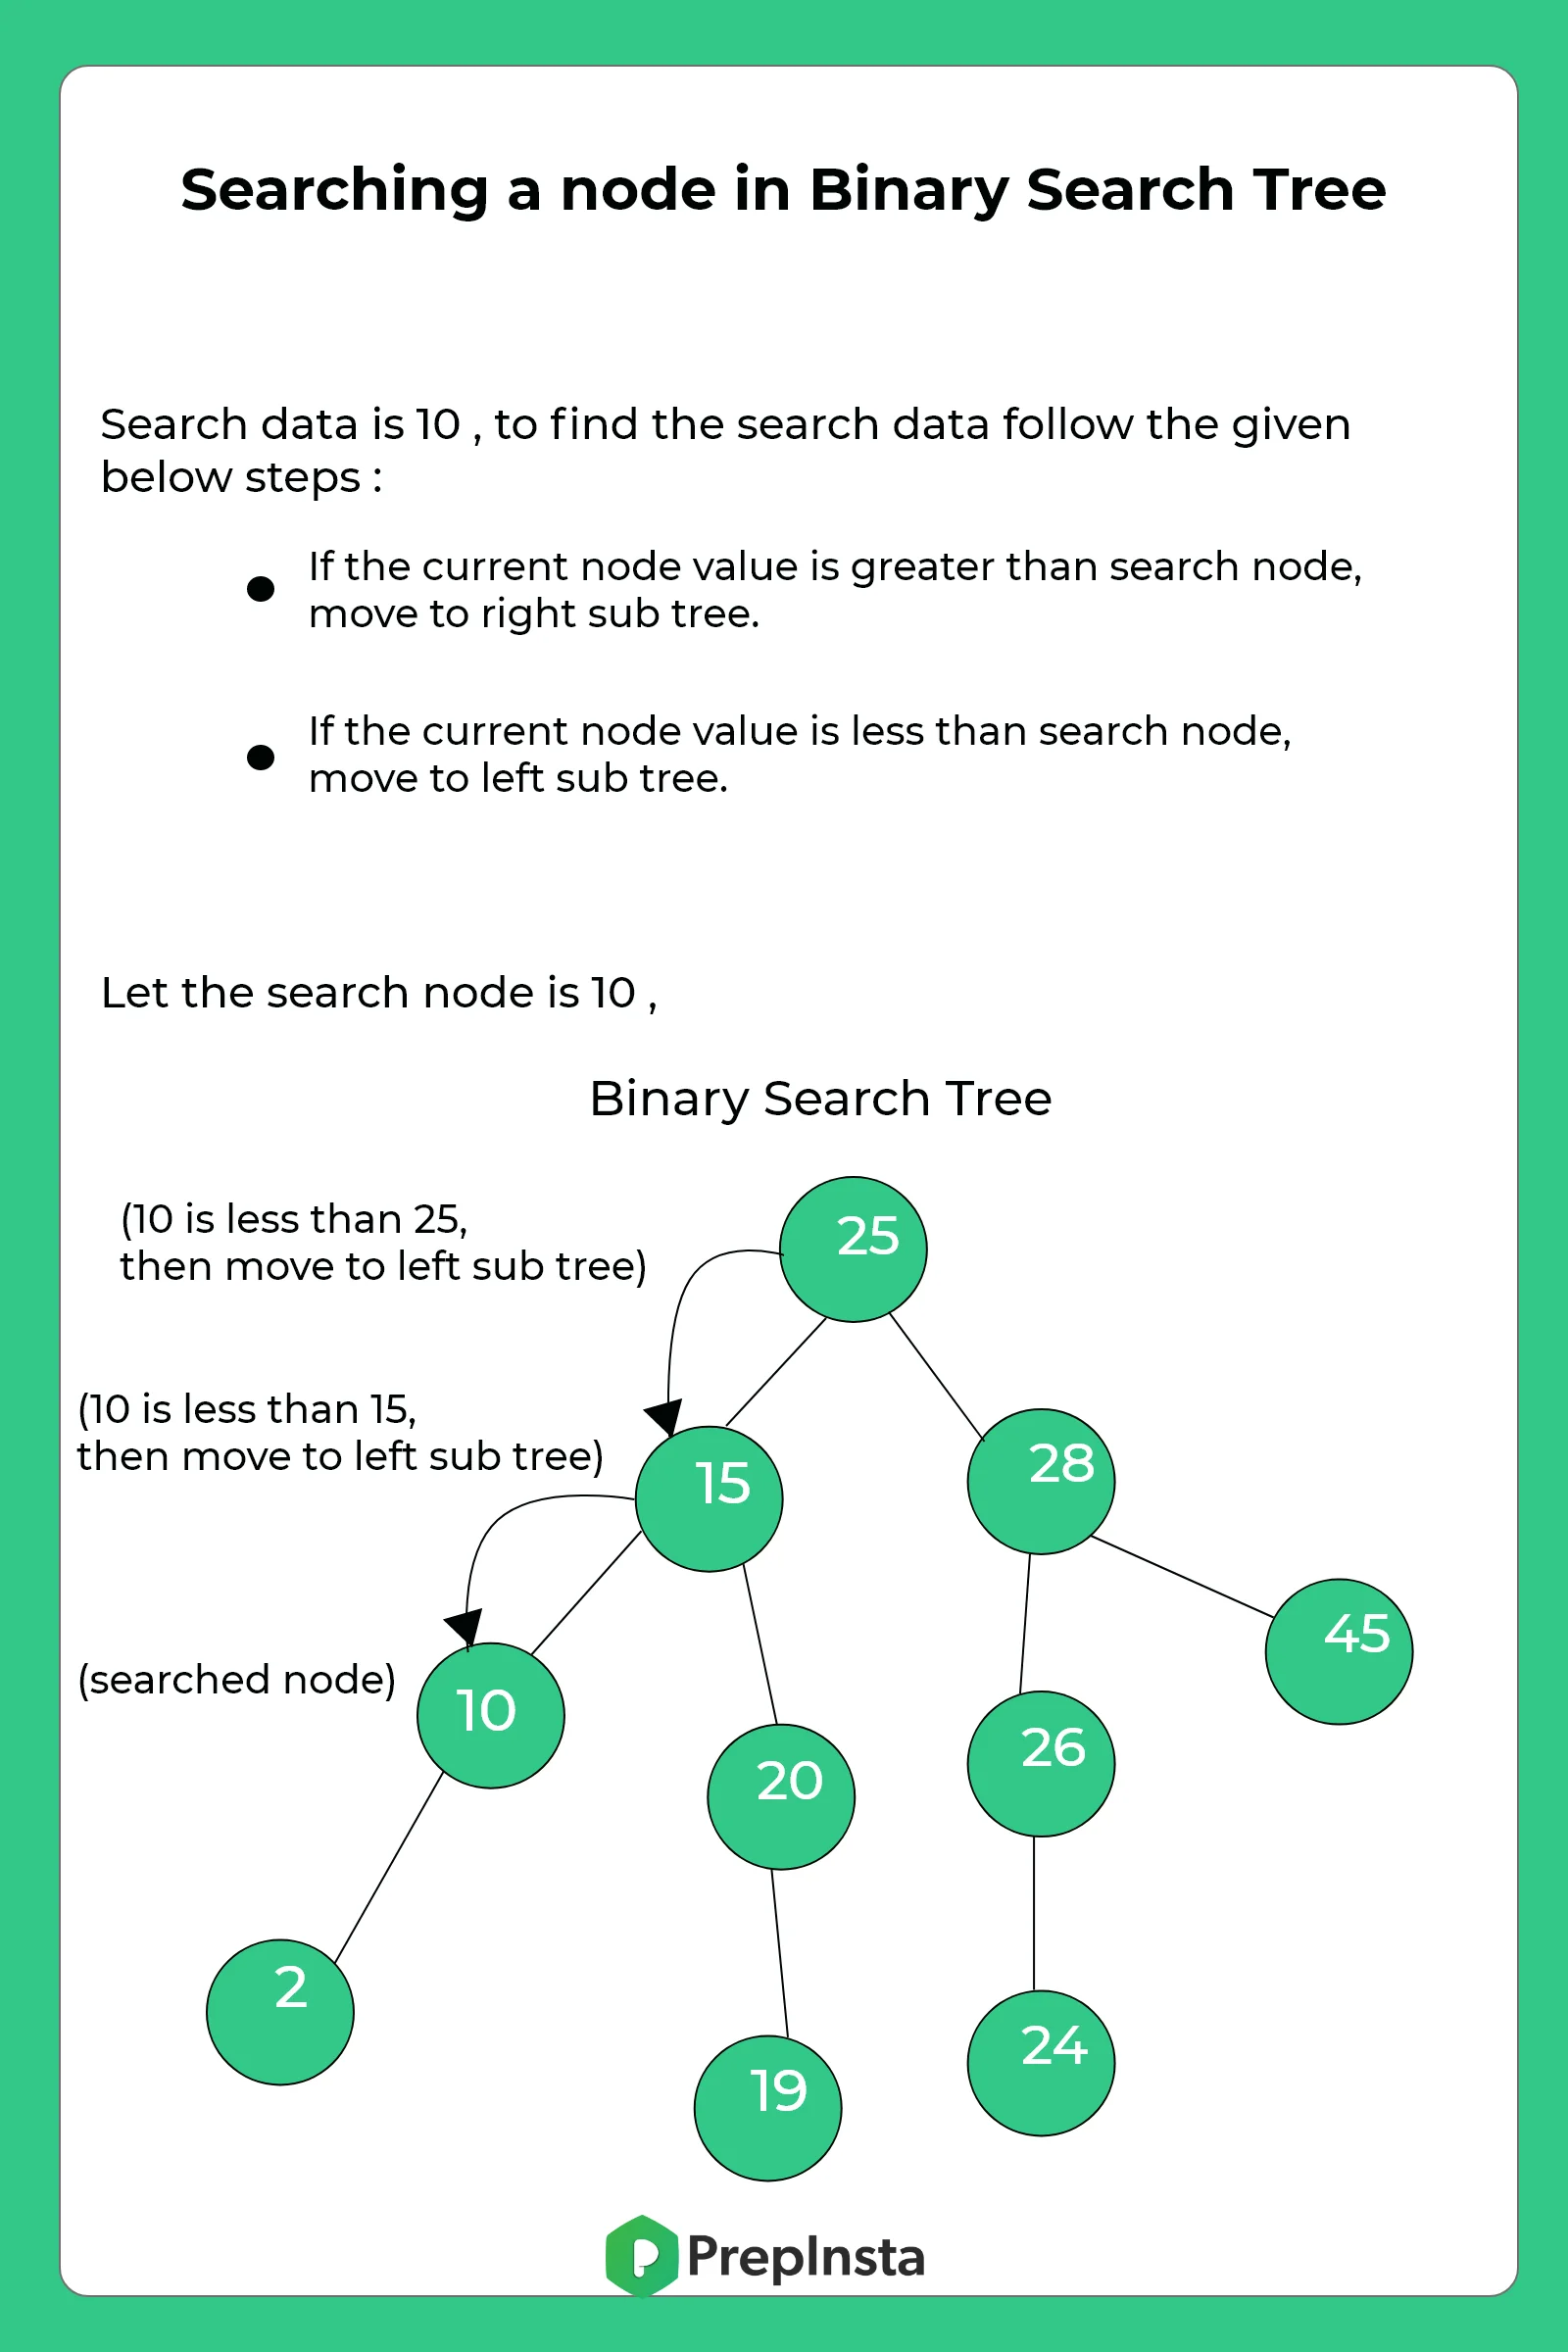 Searching a node in binary search tree